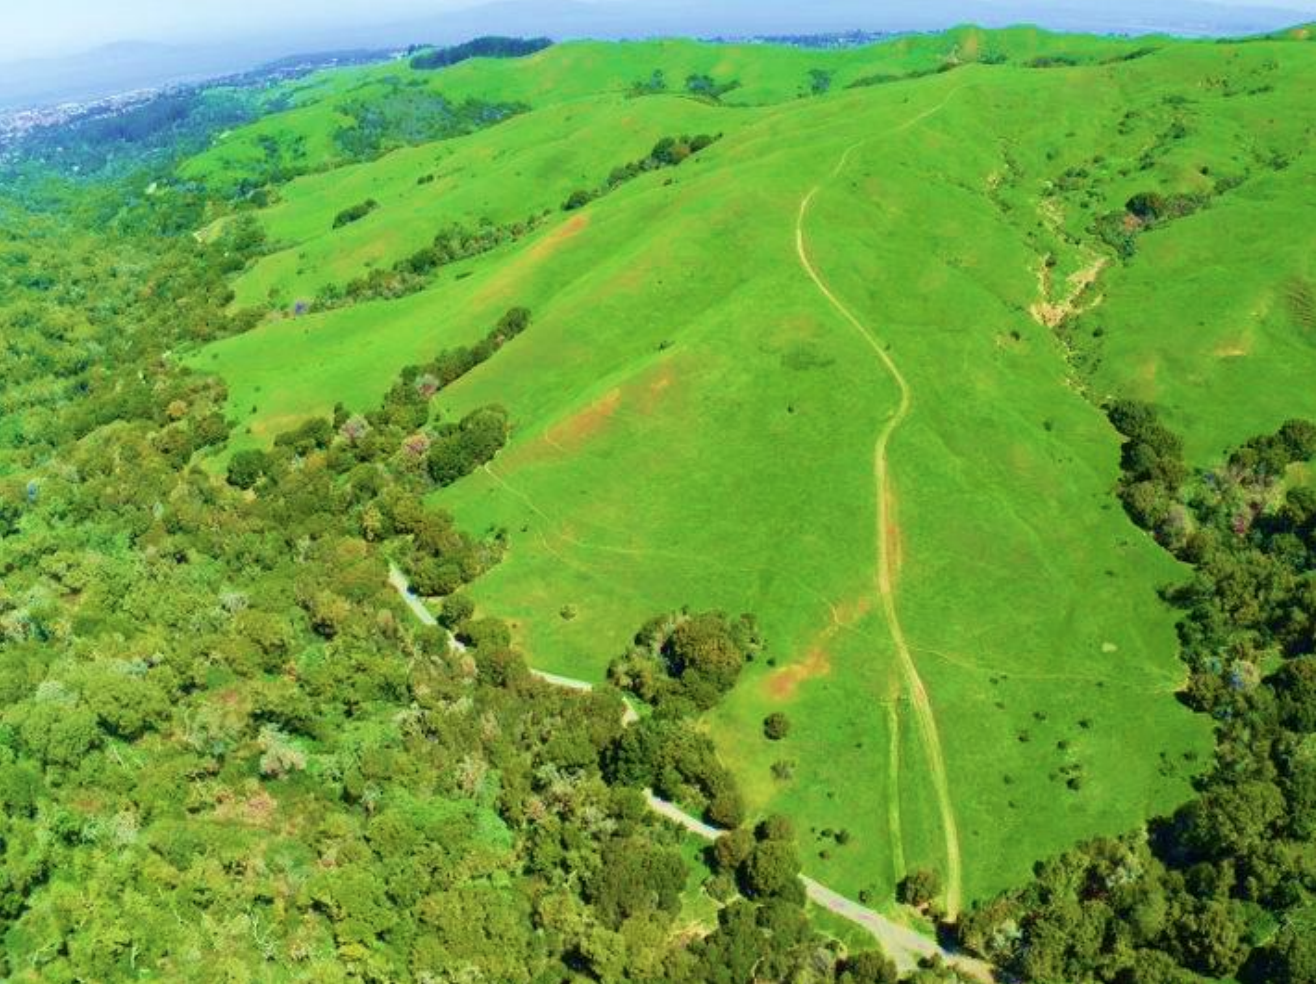 Park district considers mountain bike flow trail at Wildcat Canyon Park